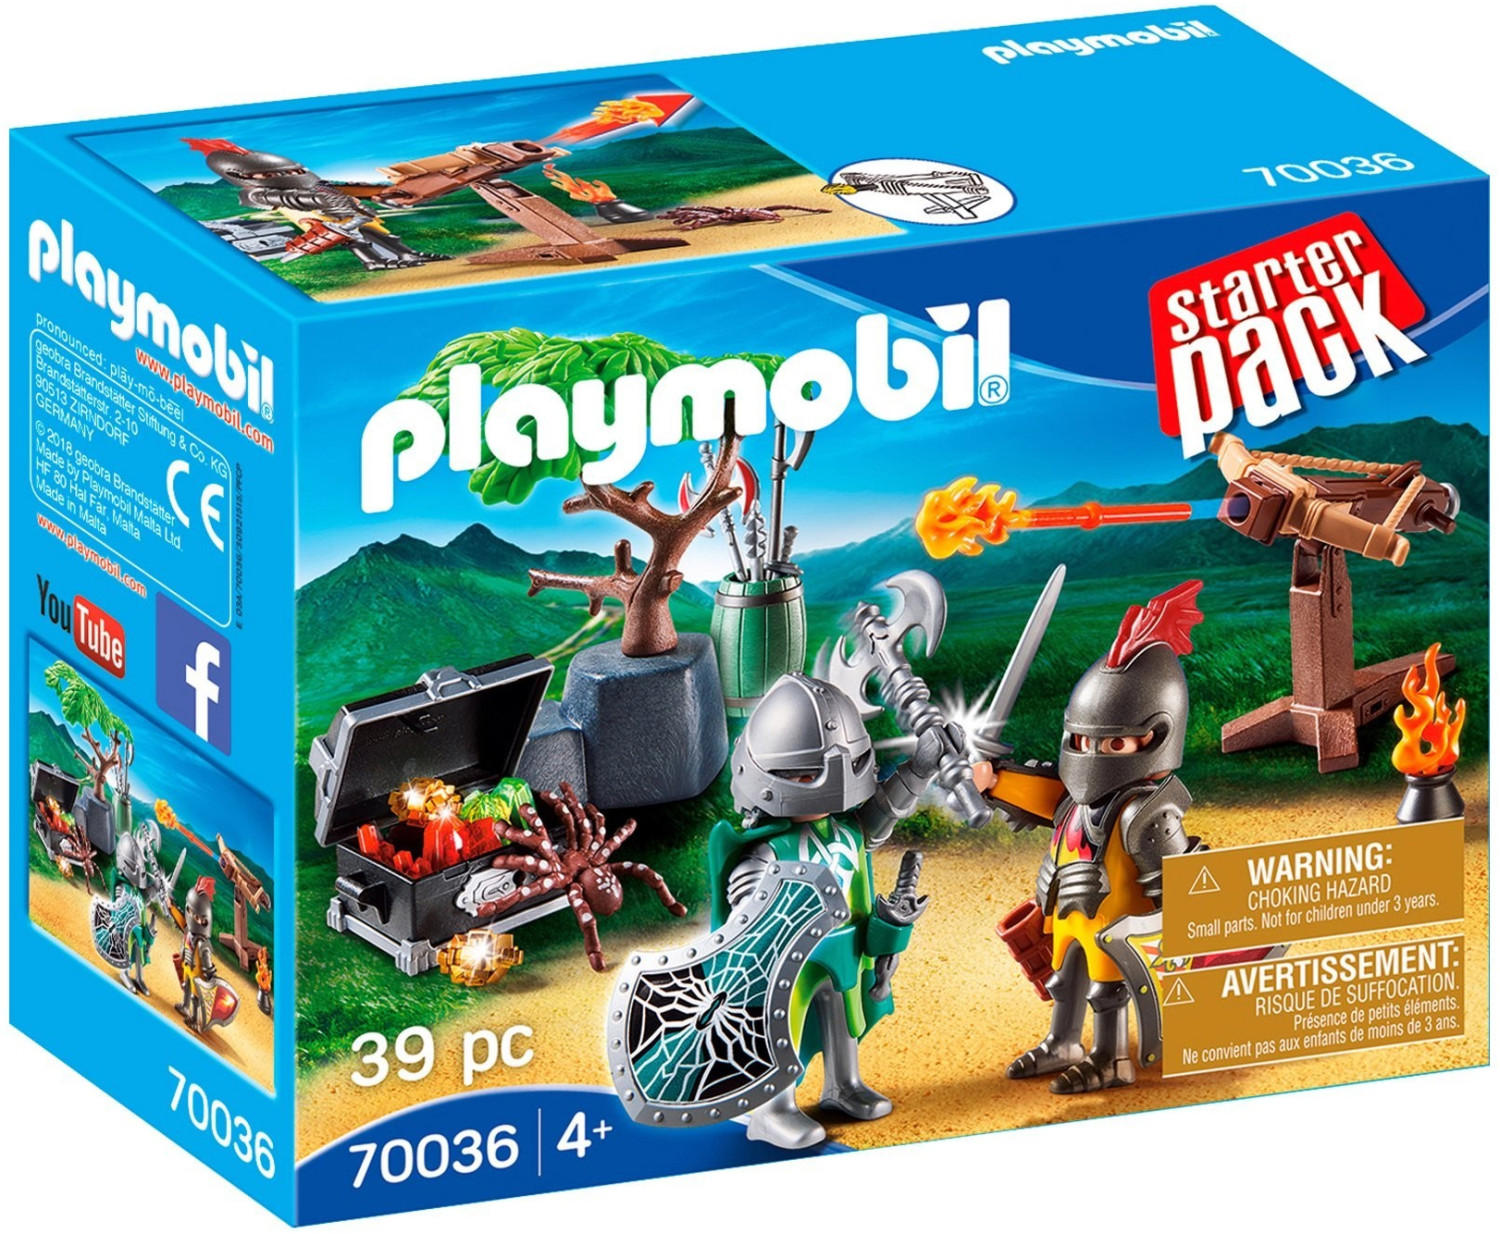 Playmobil Knights - Starter Pack with Treasure (70036)